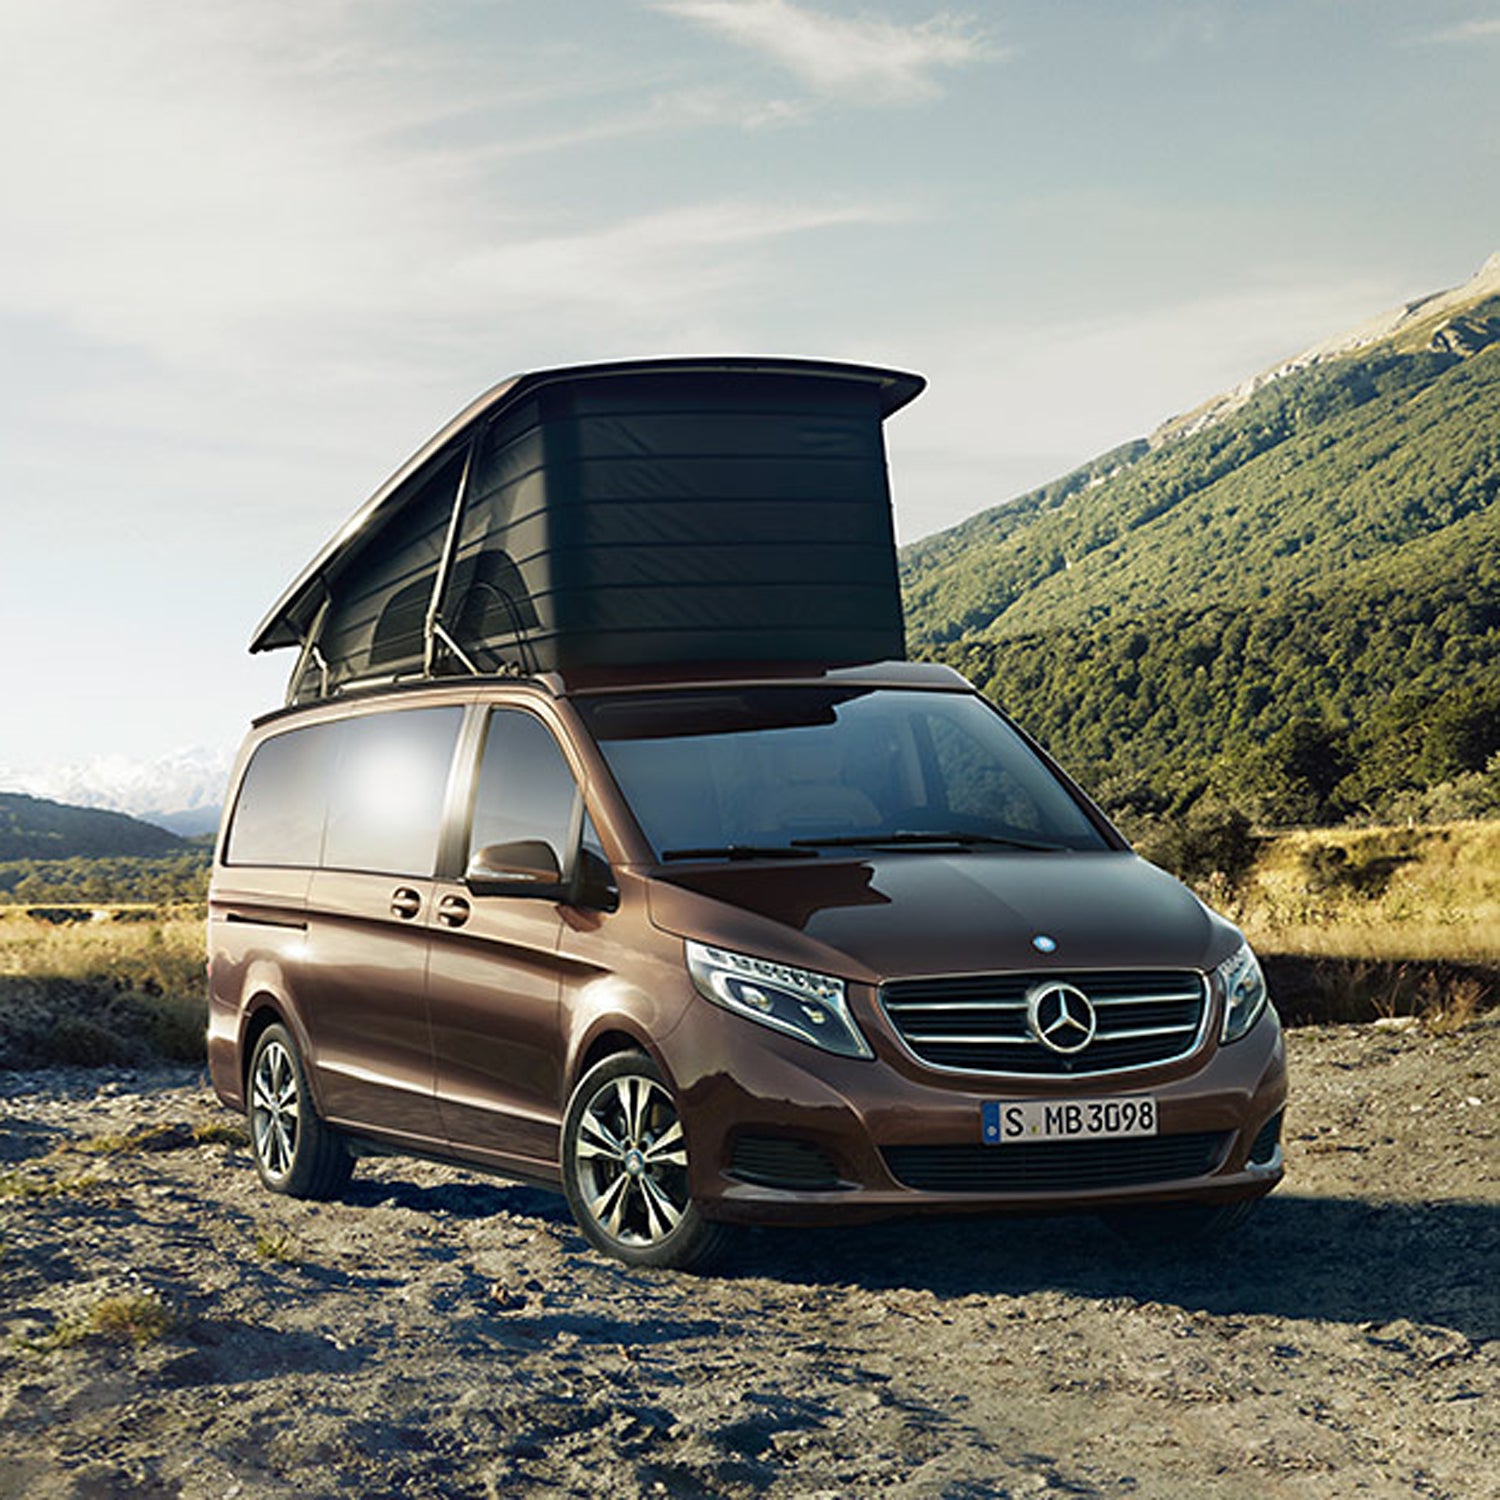 Mercedes Marco Polo – Collection 10+ Videos and 70+ Images